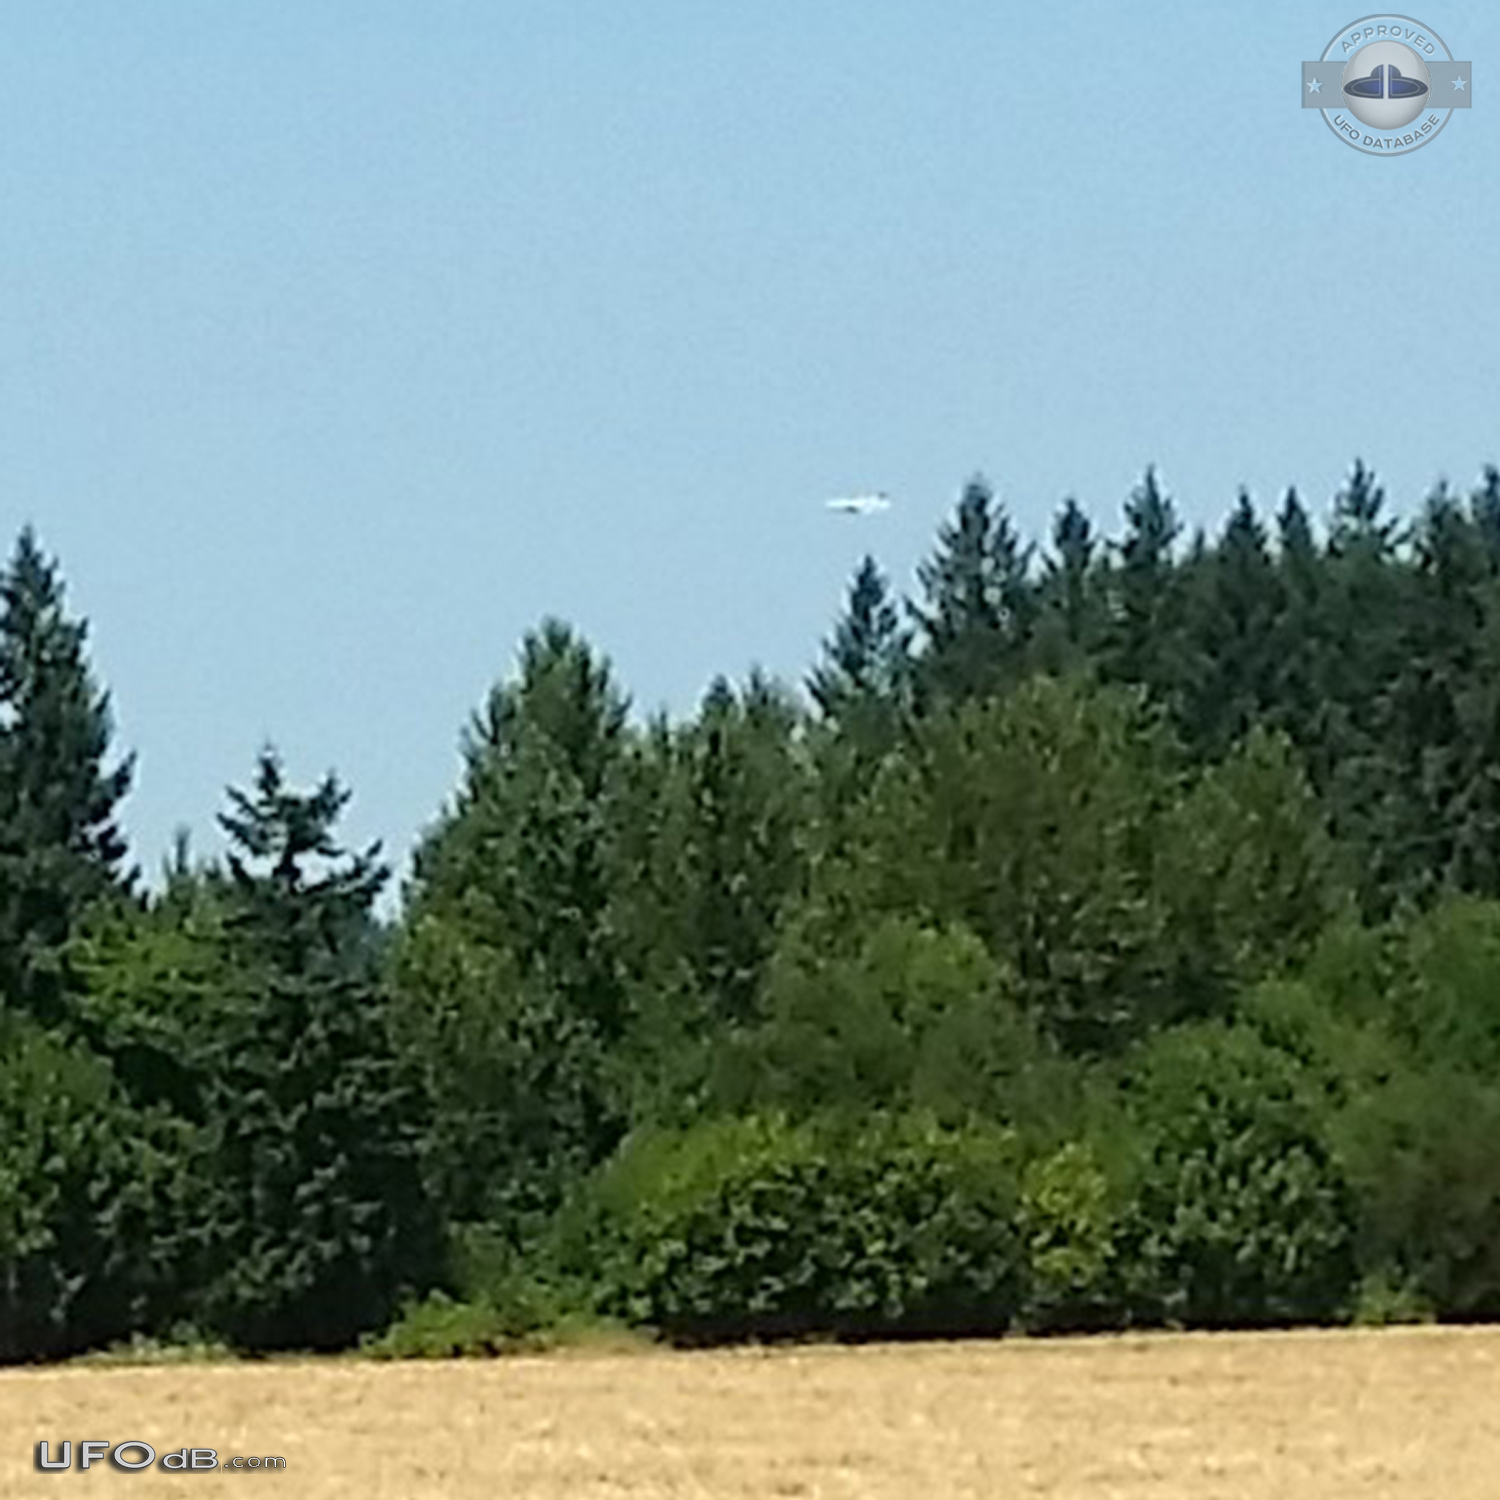 I was driving home from work and saw an object hovering over the trees UFO Picture #710-5